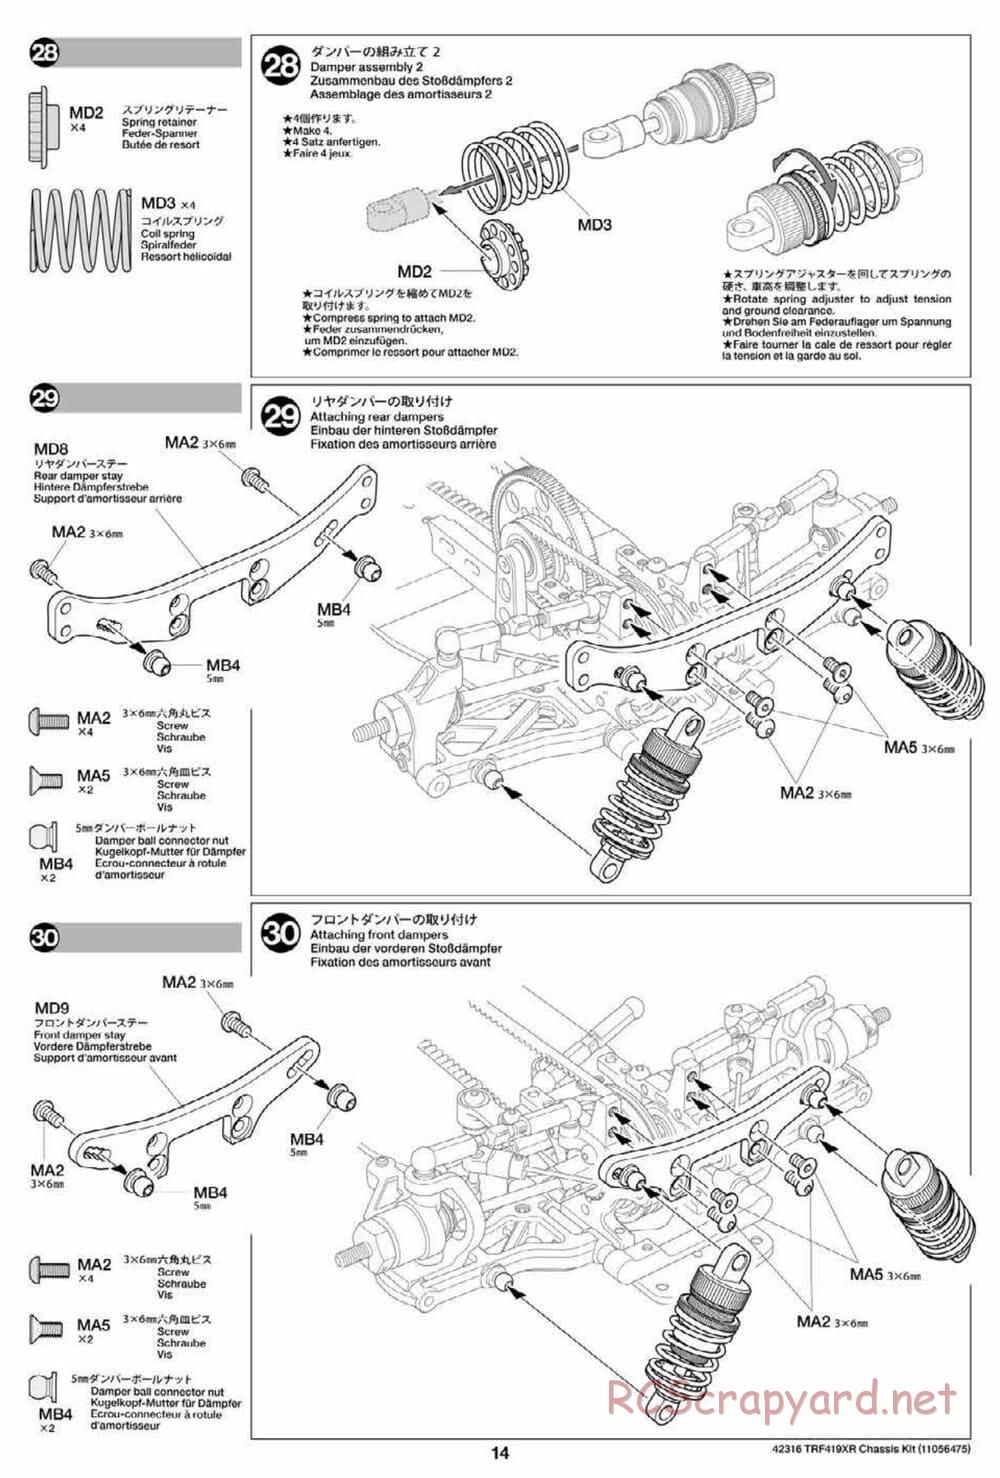 Tamiya - TRF419XR Chassis - Manual - Page 14